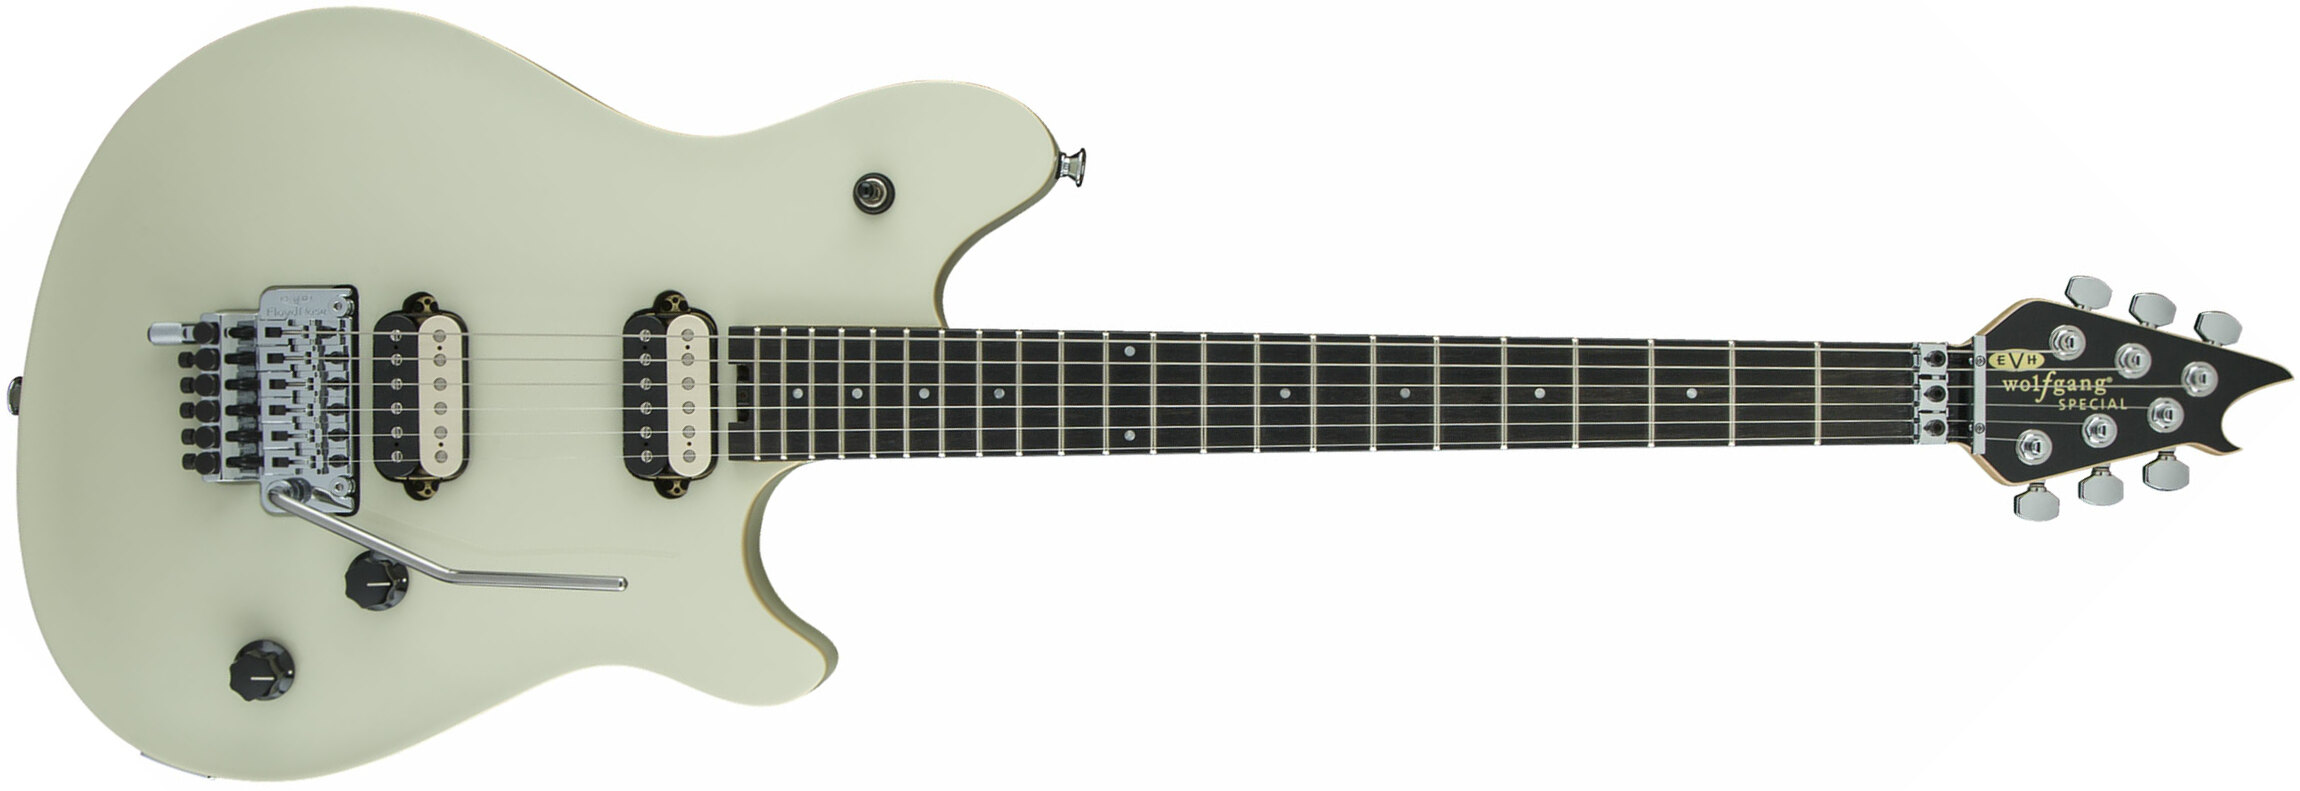 Evh Wolfgang Special Signature Mex 2h Fr Eb - Ivory - Double cut electric guitar - Main picture